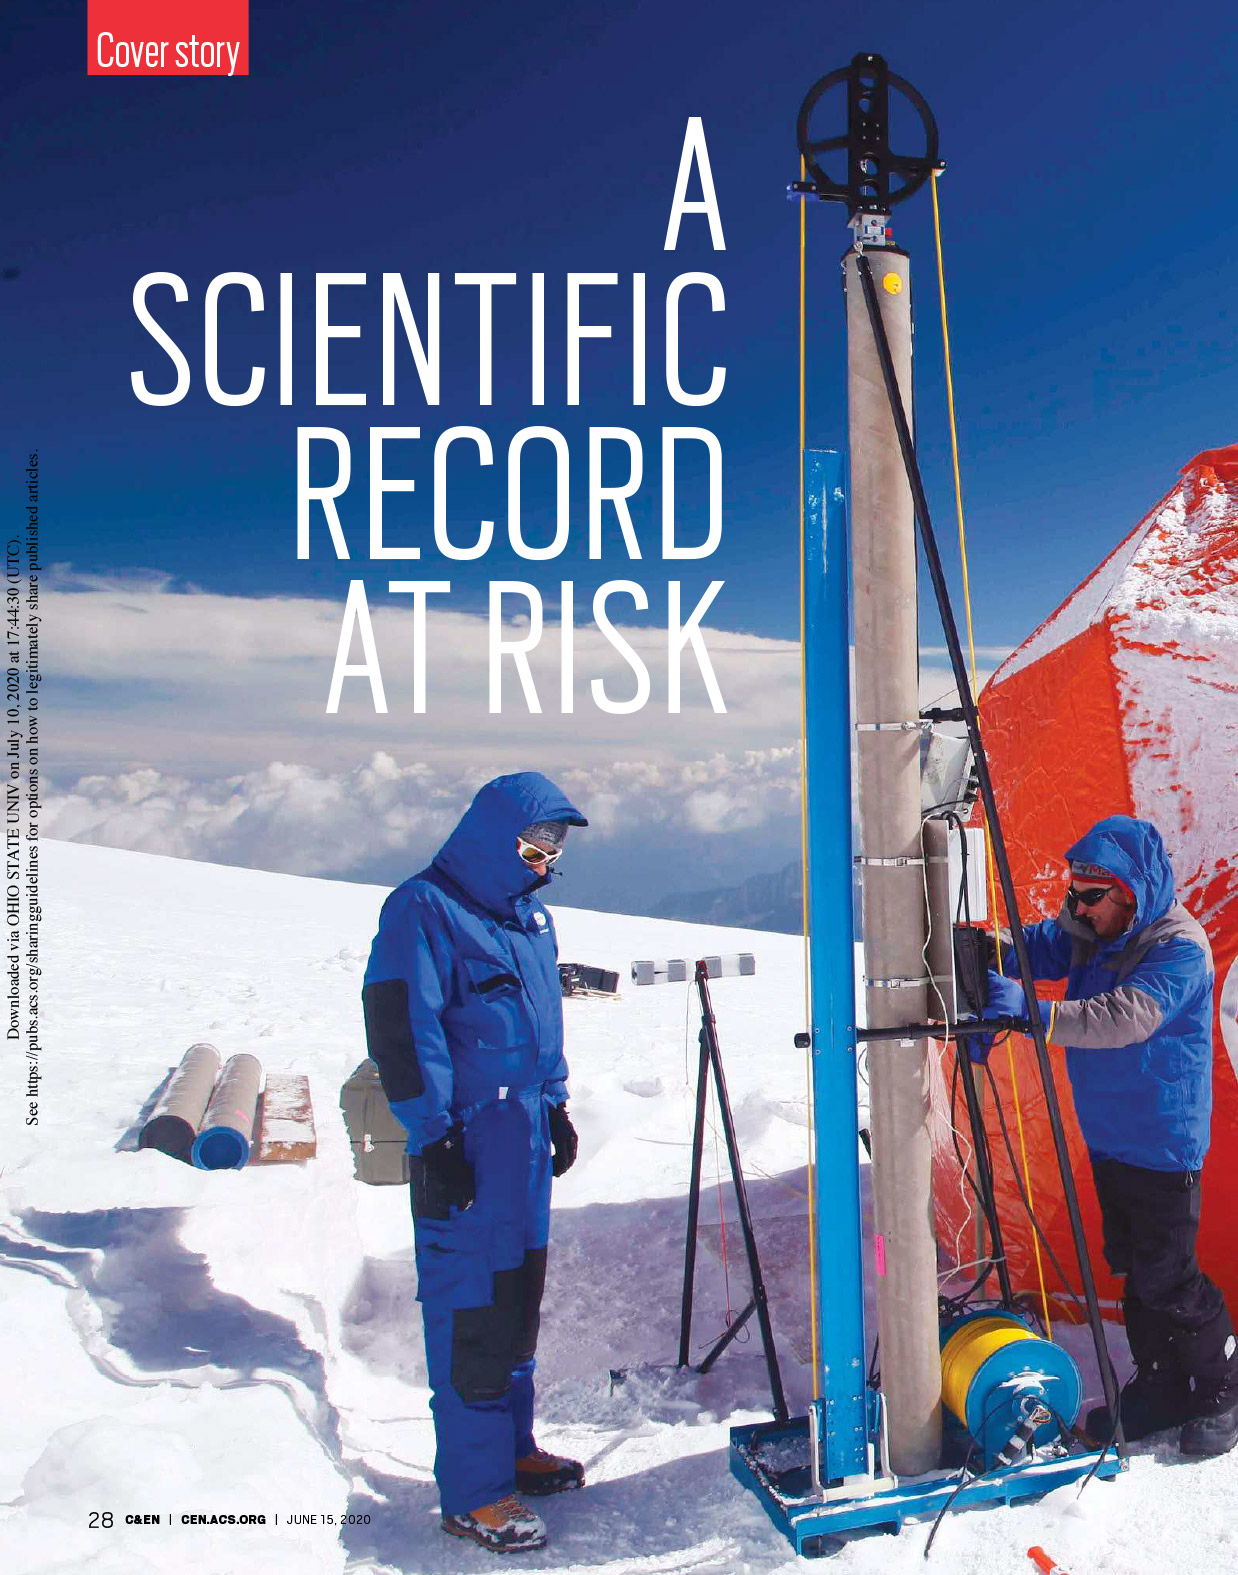 A Scientific Record at Risk. Cover story from American Chemical Society, 2020/06/15.